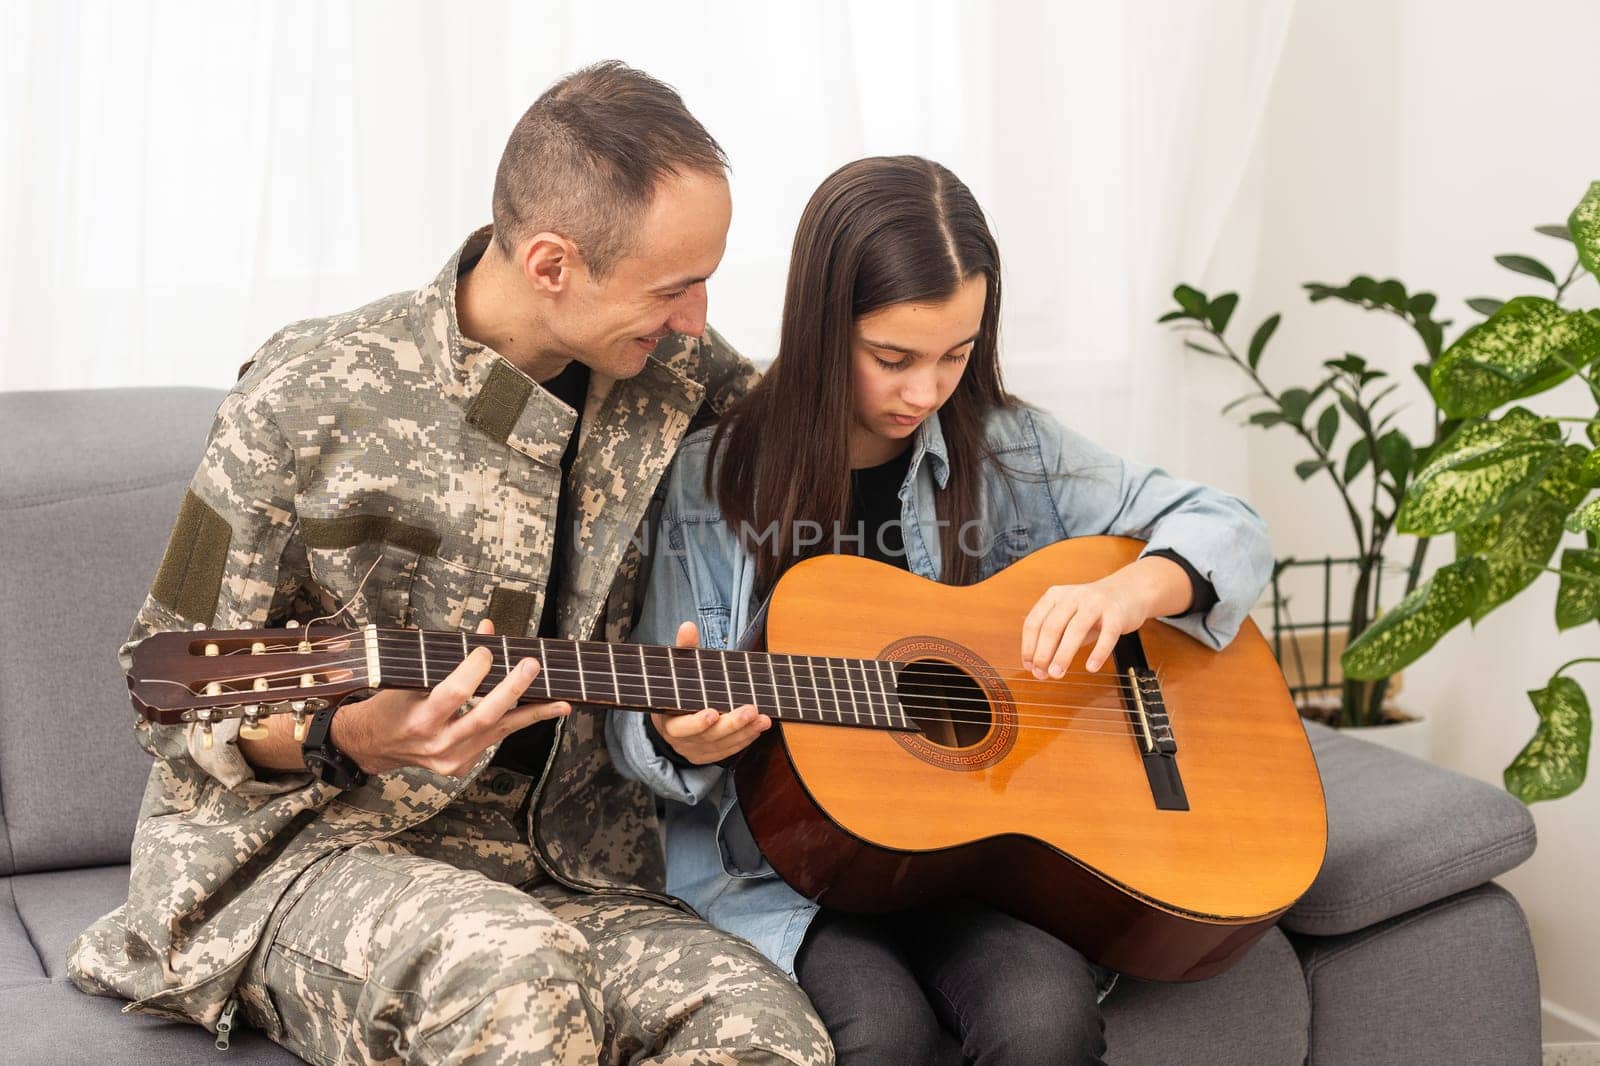 The veteran came back from army. A man in uniform with his daughter. The veteran is playing the guitar. by Andelov13